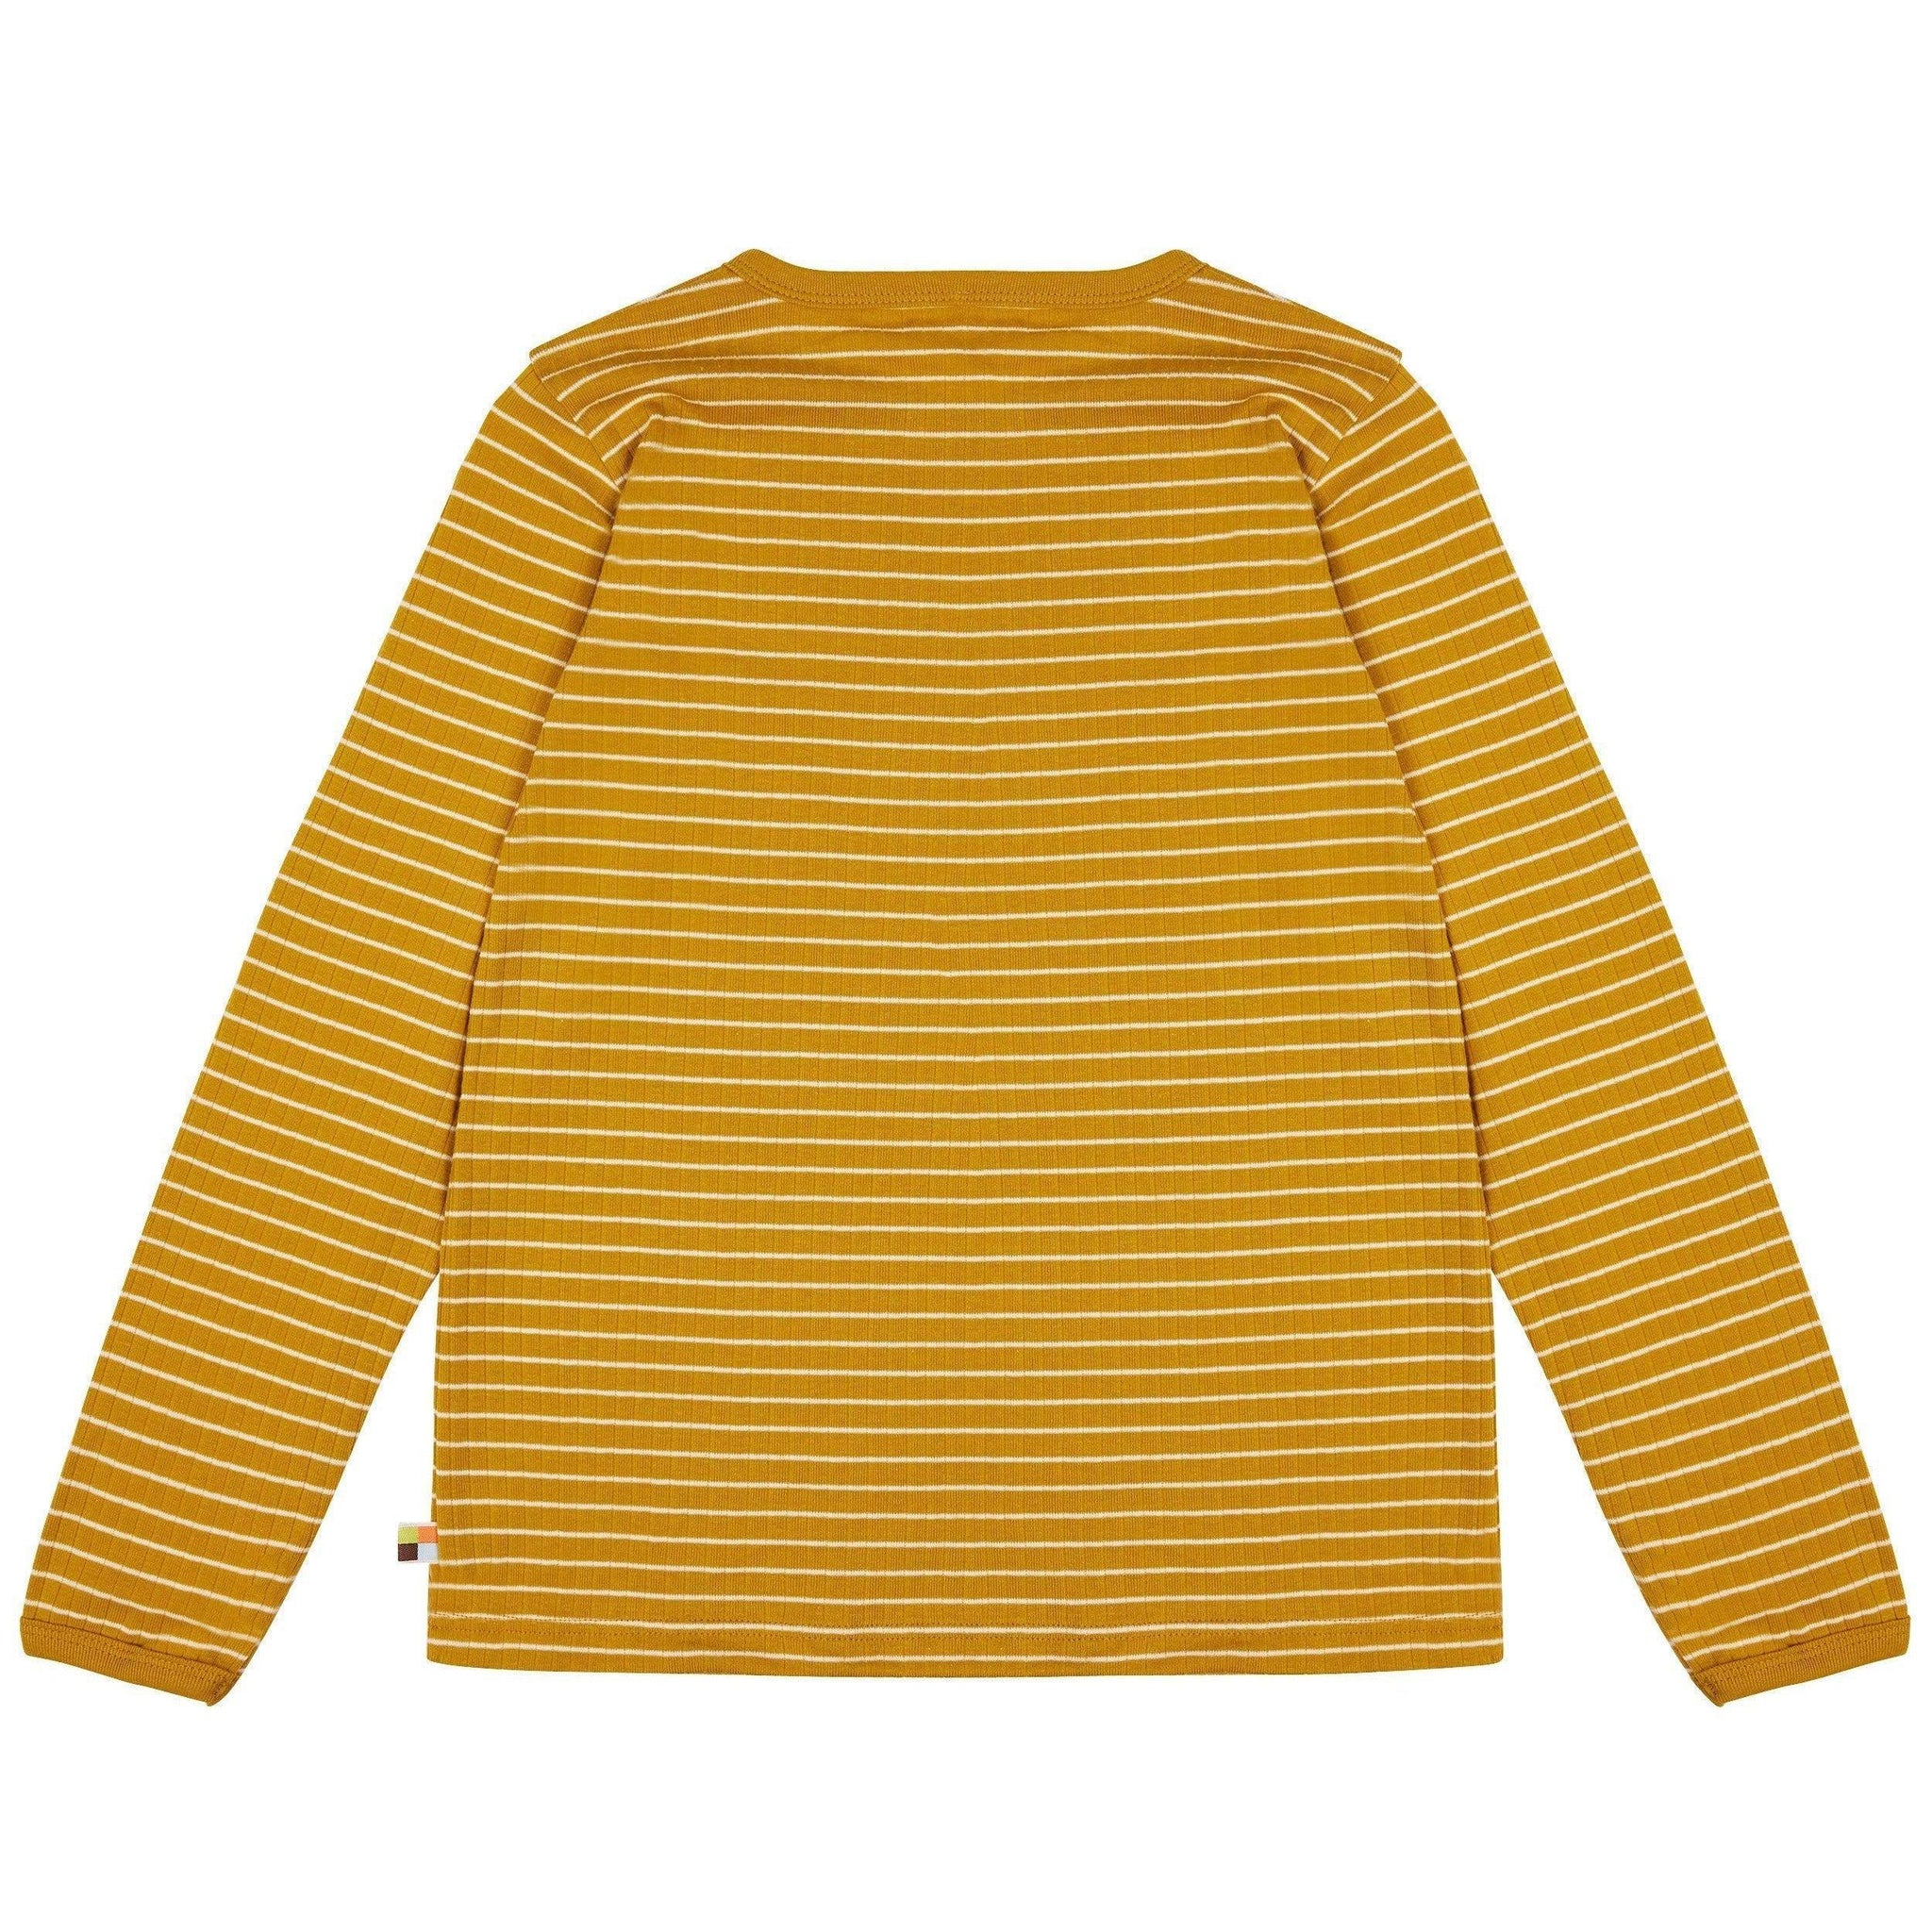 Loud + Proud - Curry Long Sleeved Striped Top